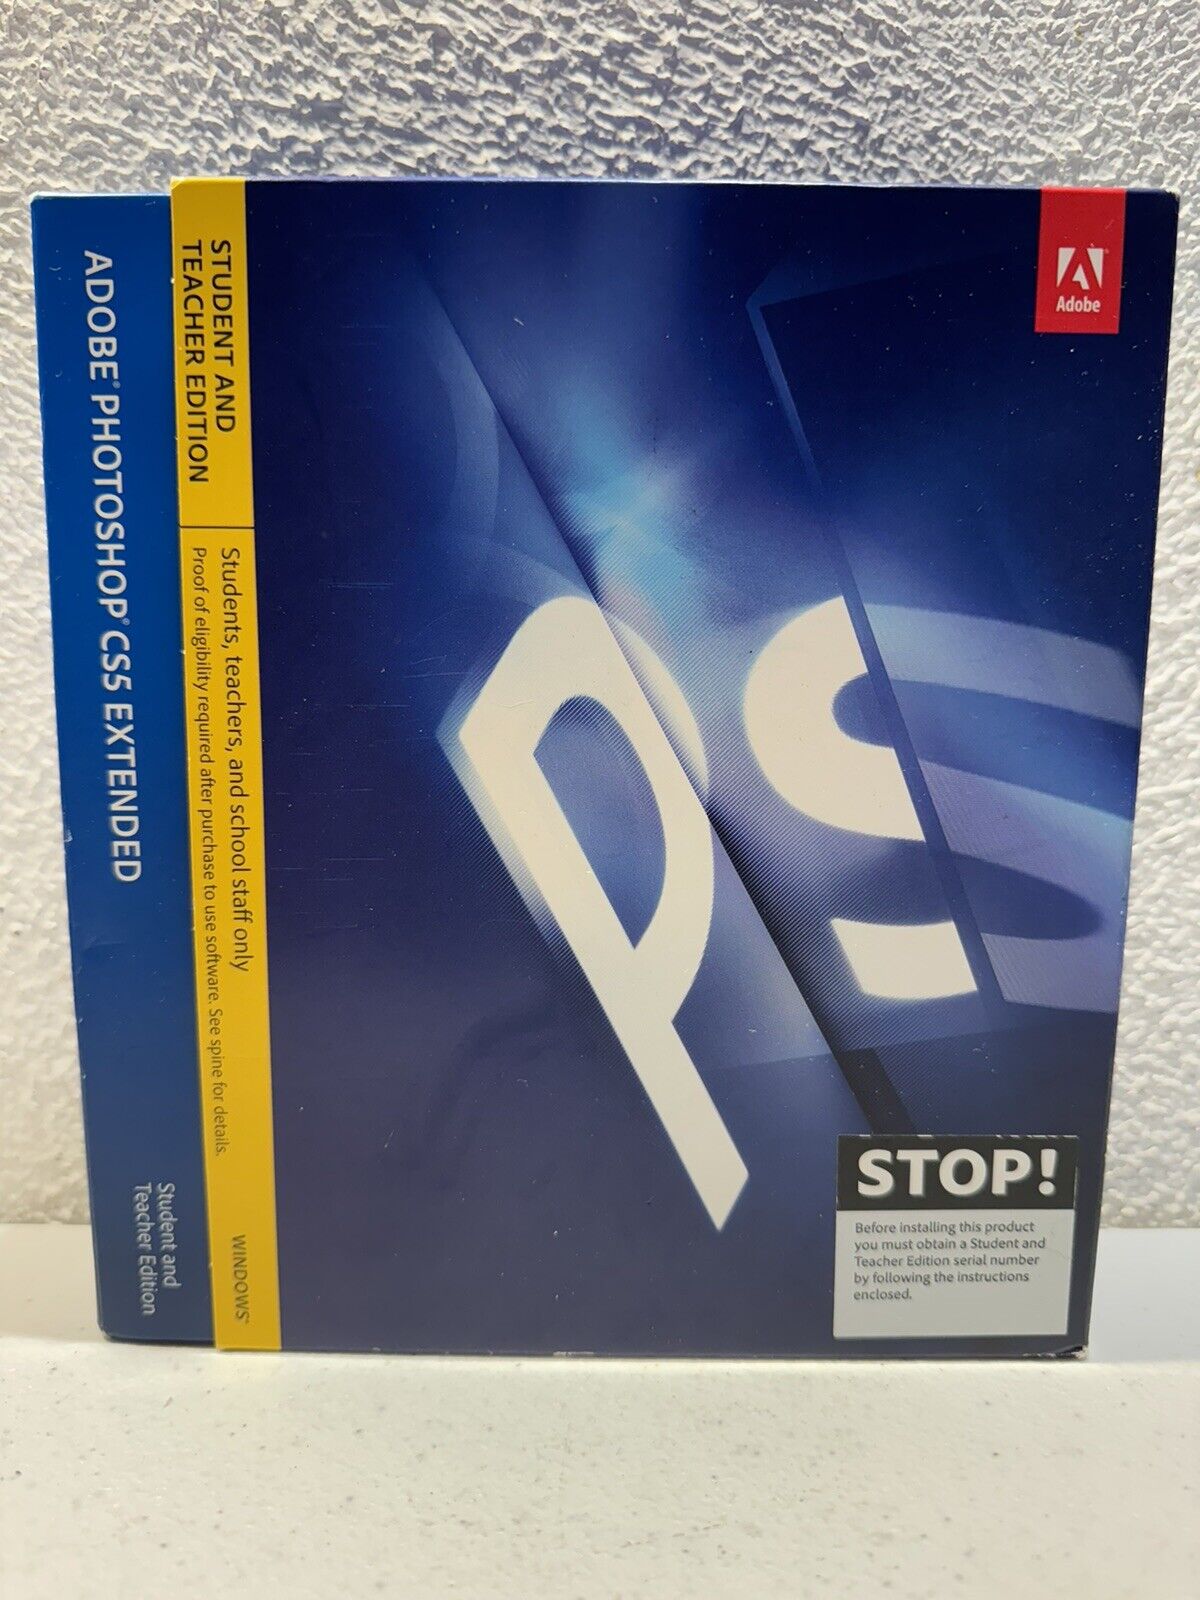 Adobe Photoshop CS5 Extended  for Windows Teacher Edition w/Serial Number